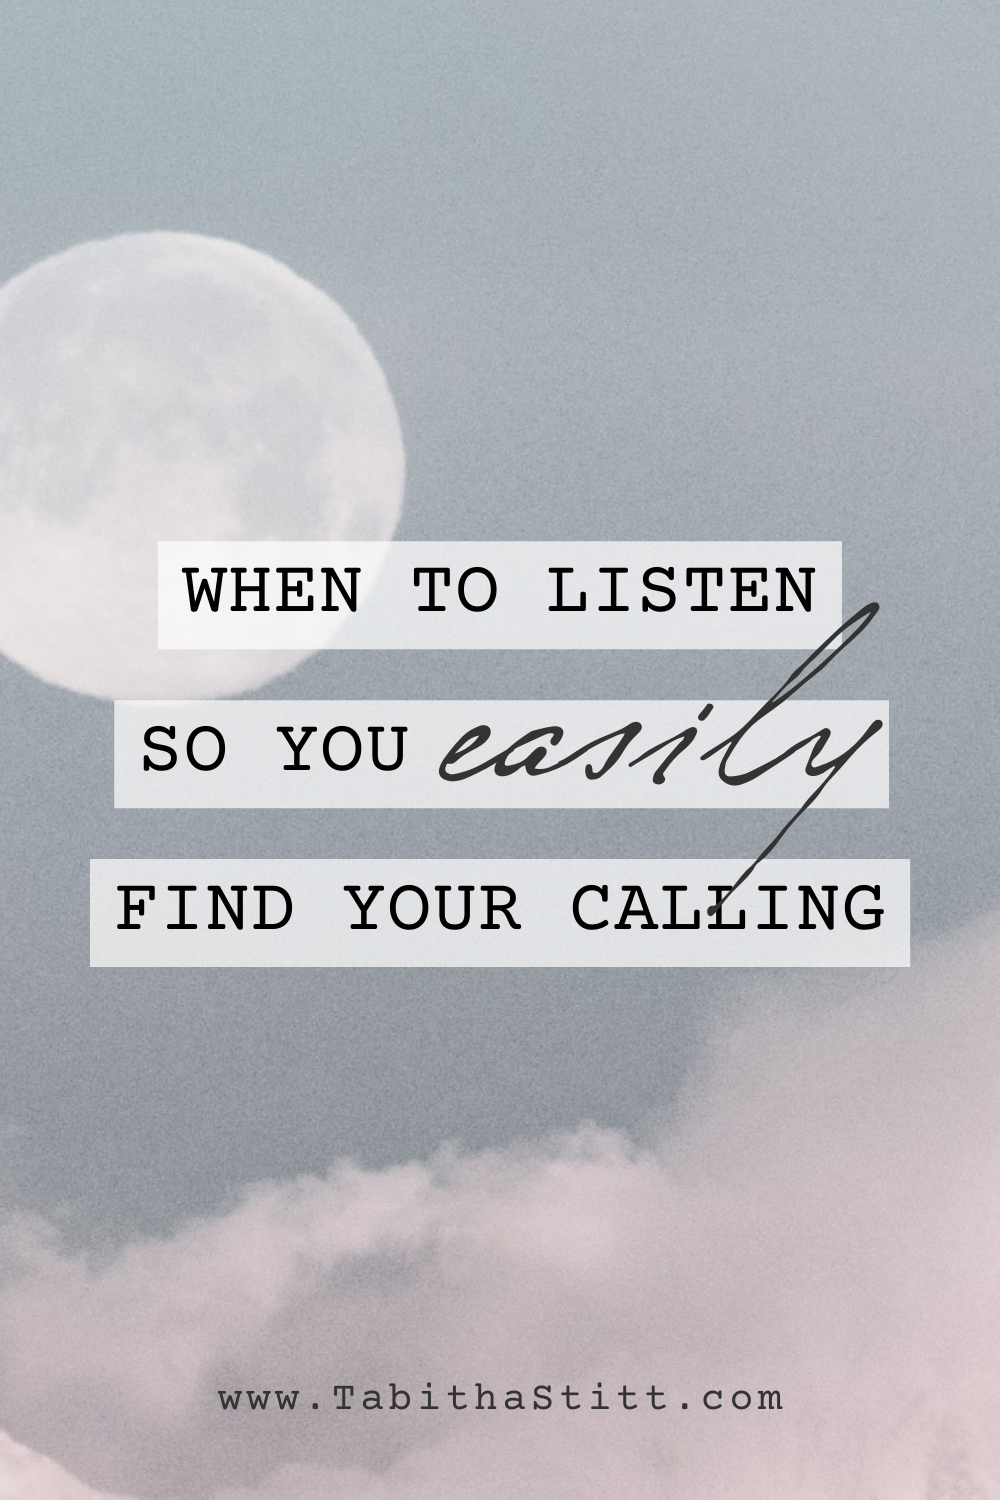 When to Listen so You Easily Find and Discover Your Calling from The Blog Tabitha Stitt The Self-Help Psychic with the moon for light and faith